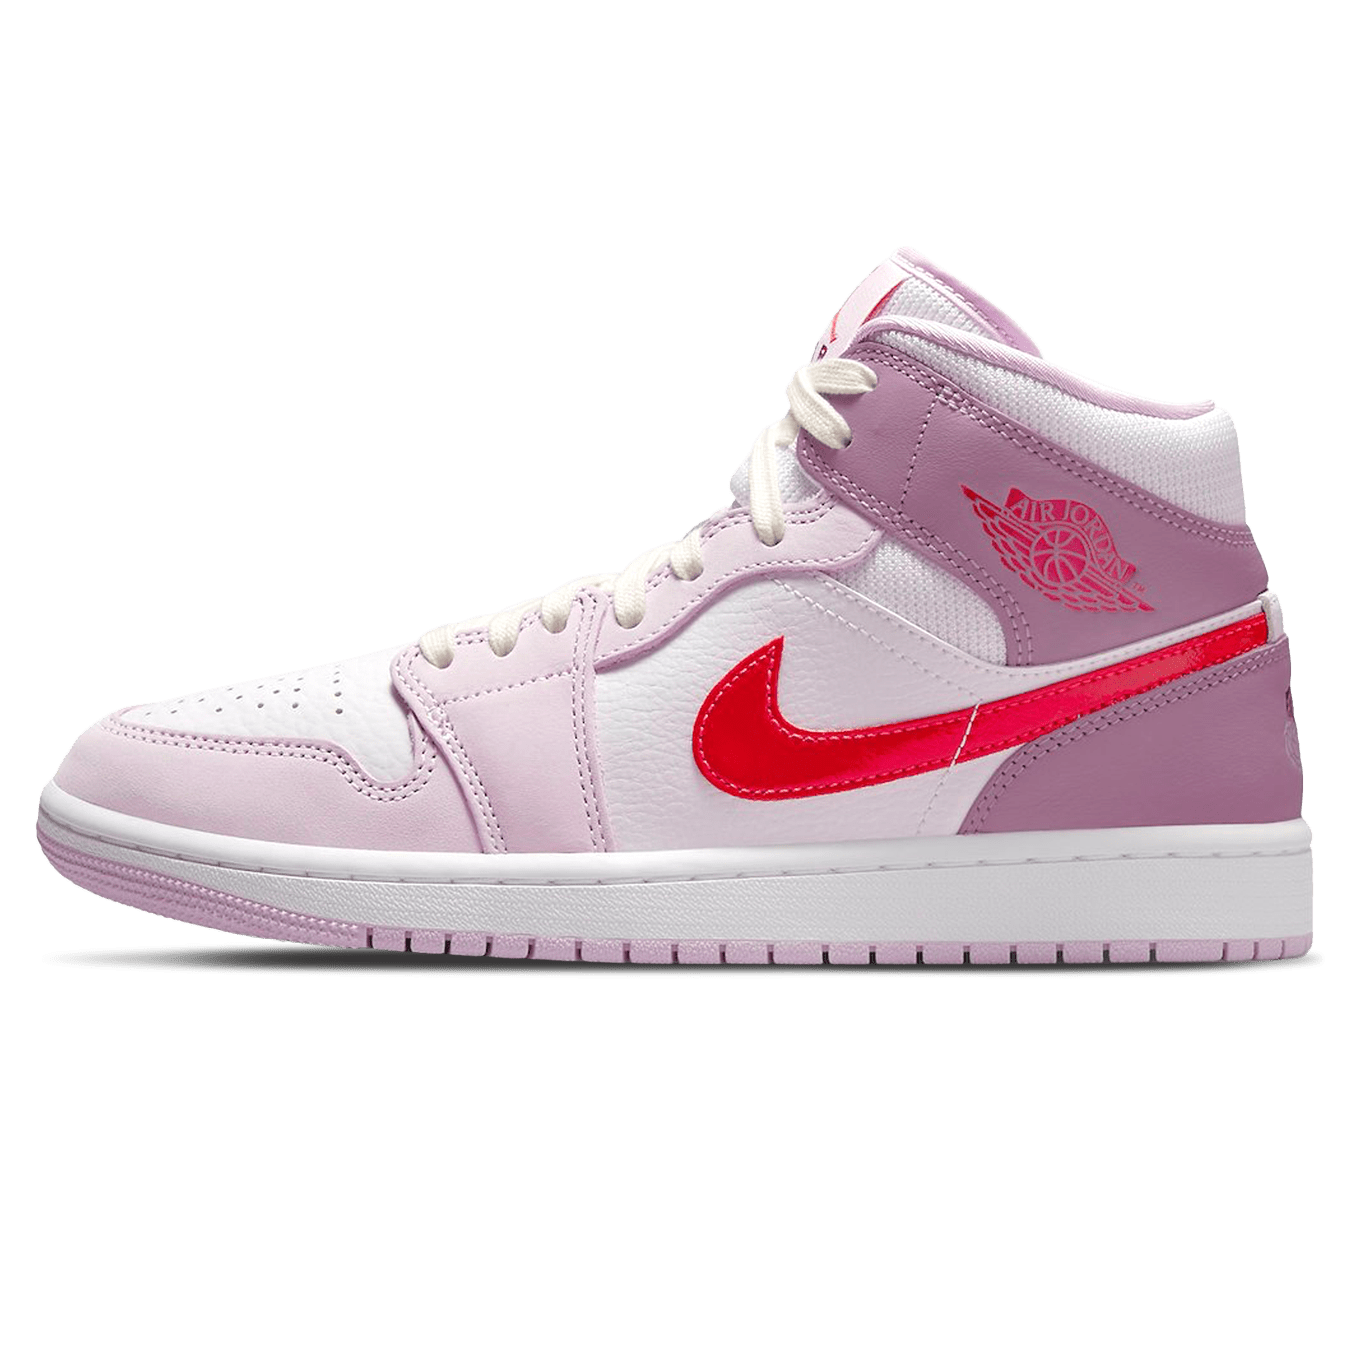 Double Boxed  274.99 Nike Air Jordan 1 Mid Valentine's Day (W) Double Boxed